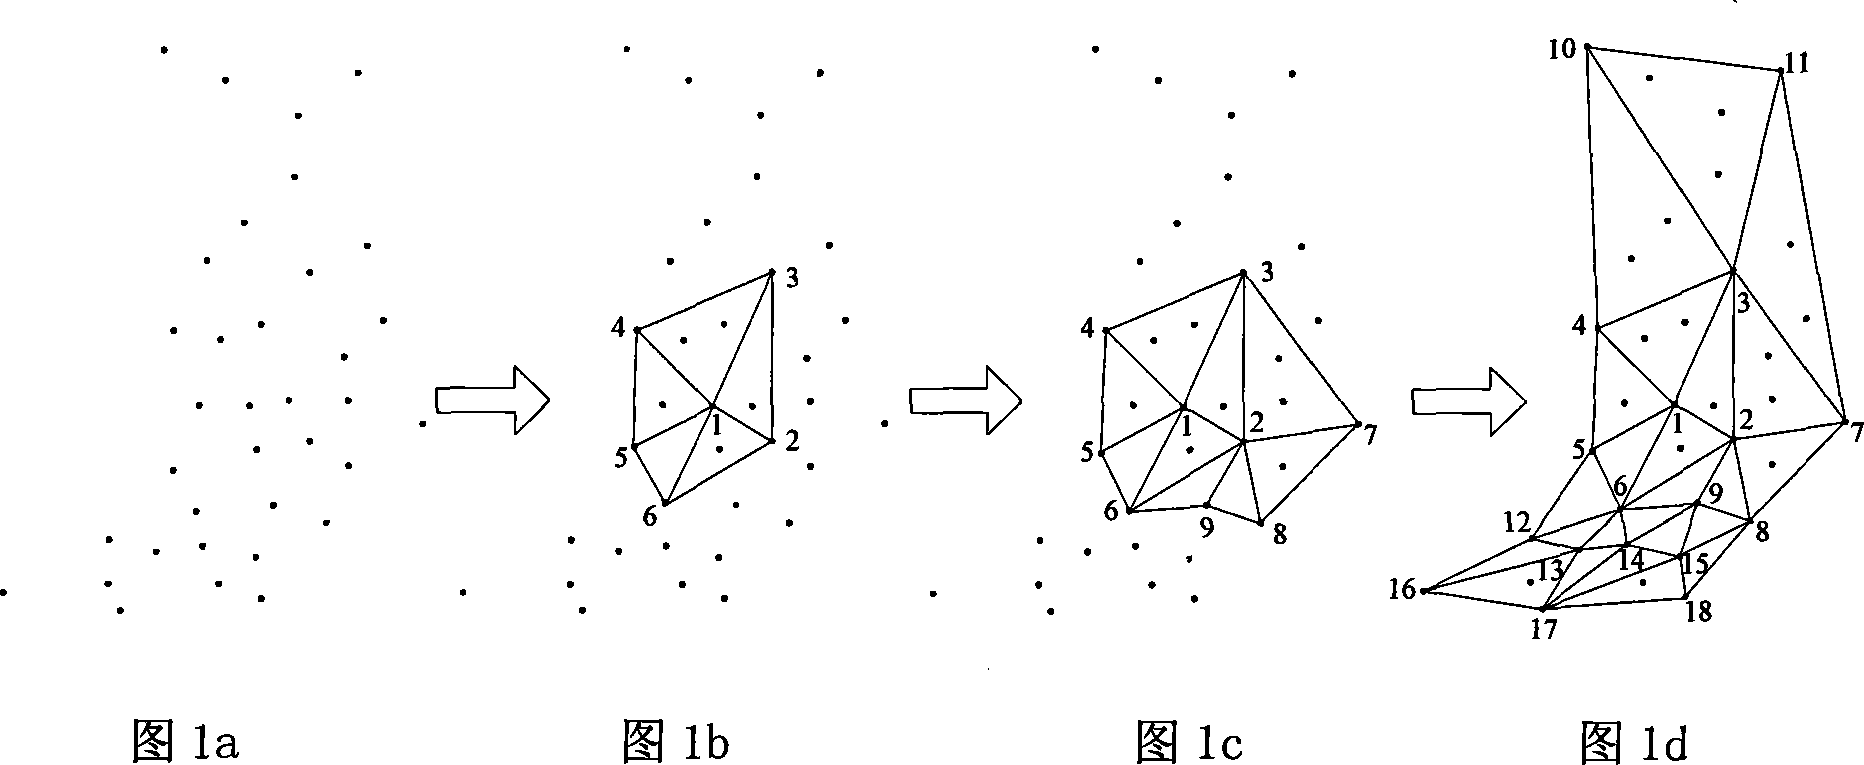 System and method for converting disordered point cloud to triangular net based on adaptive flatness